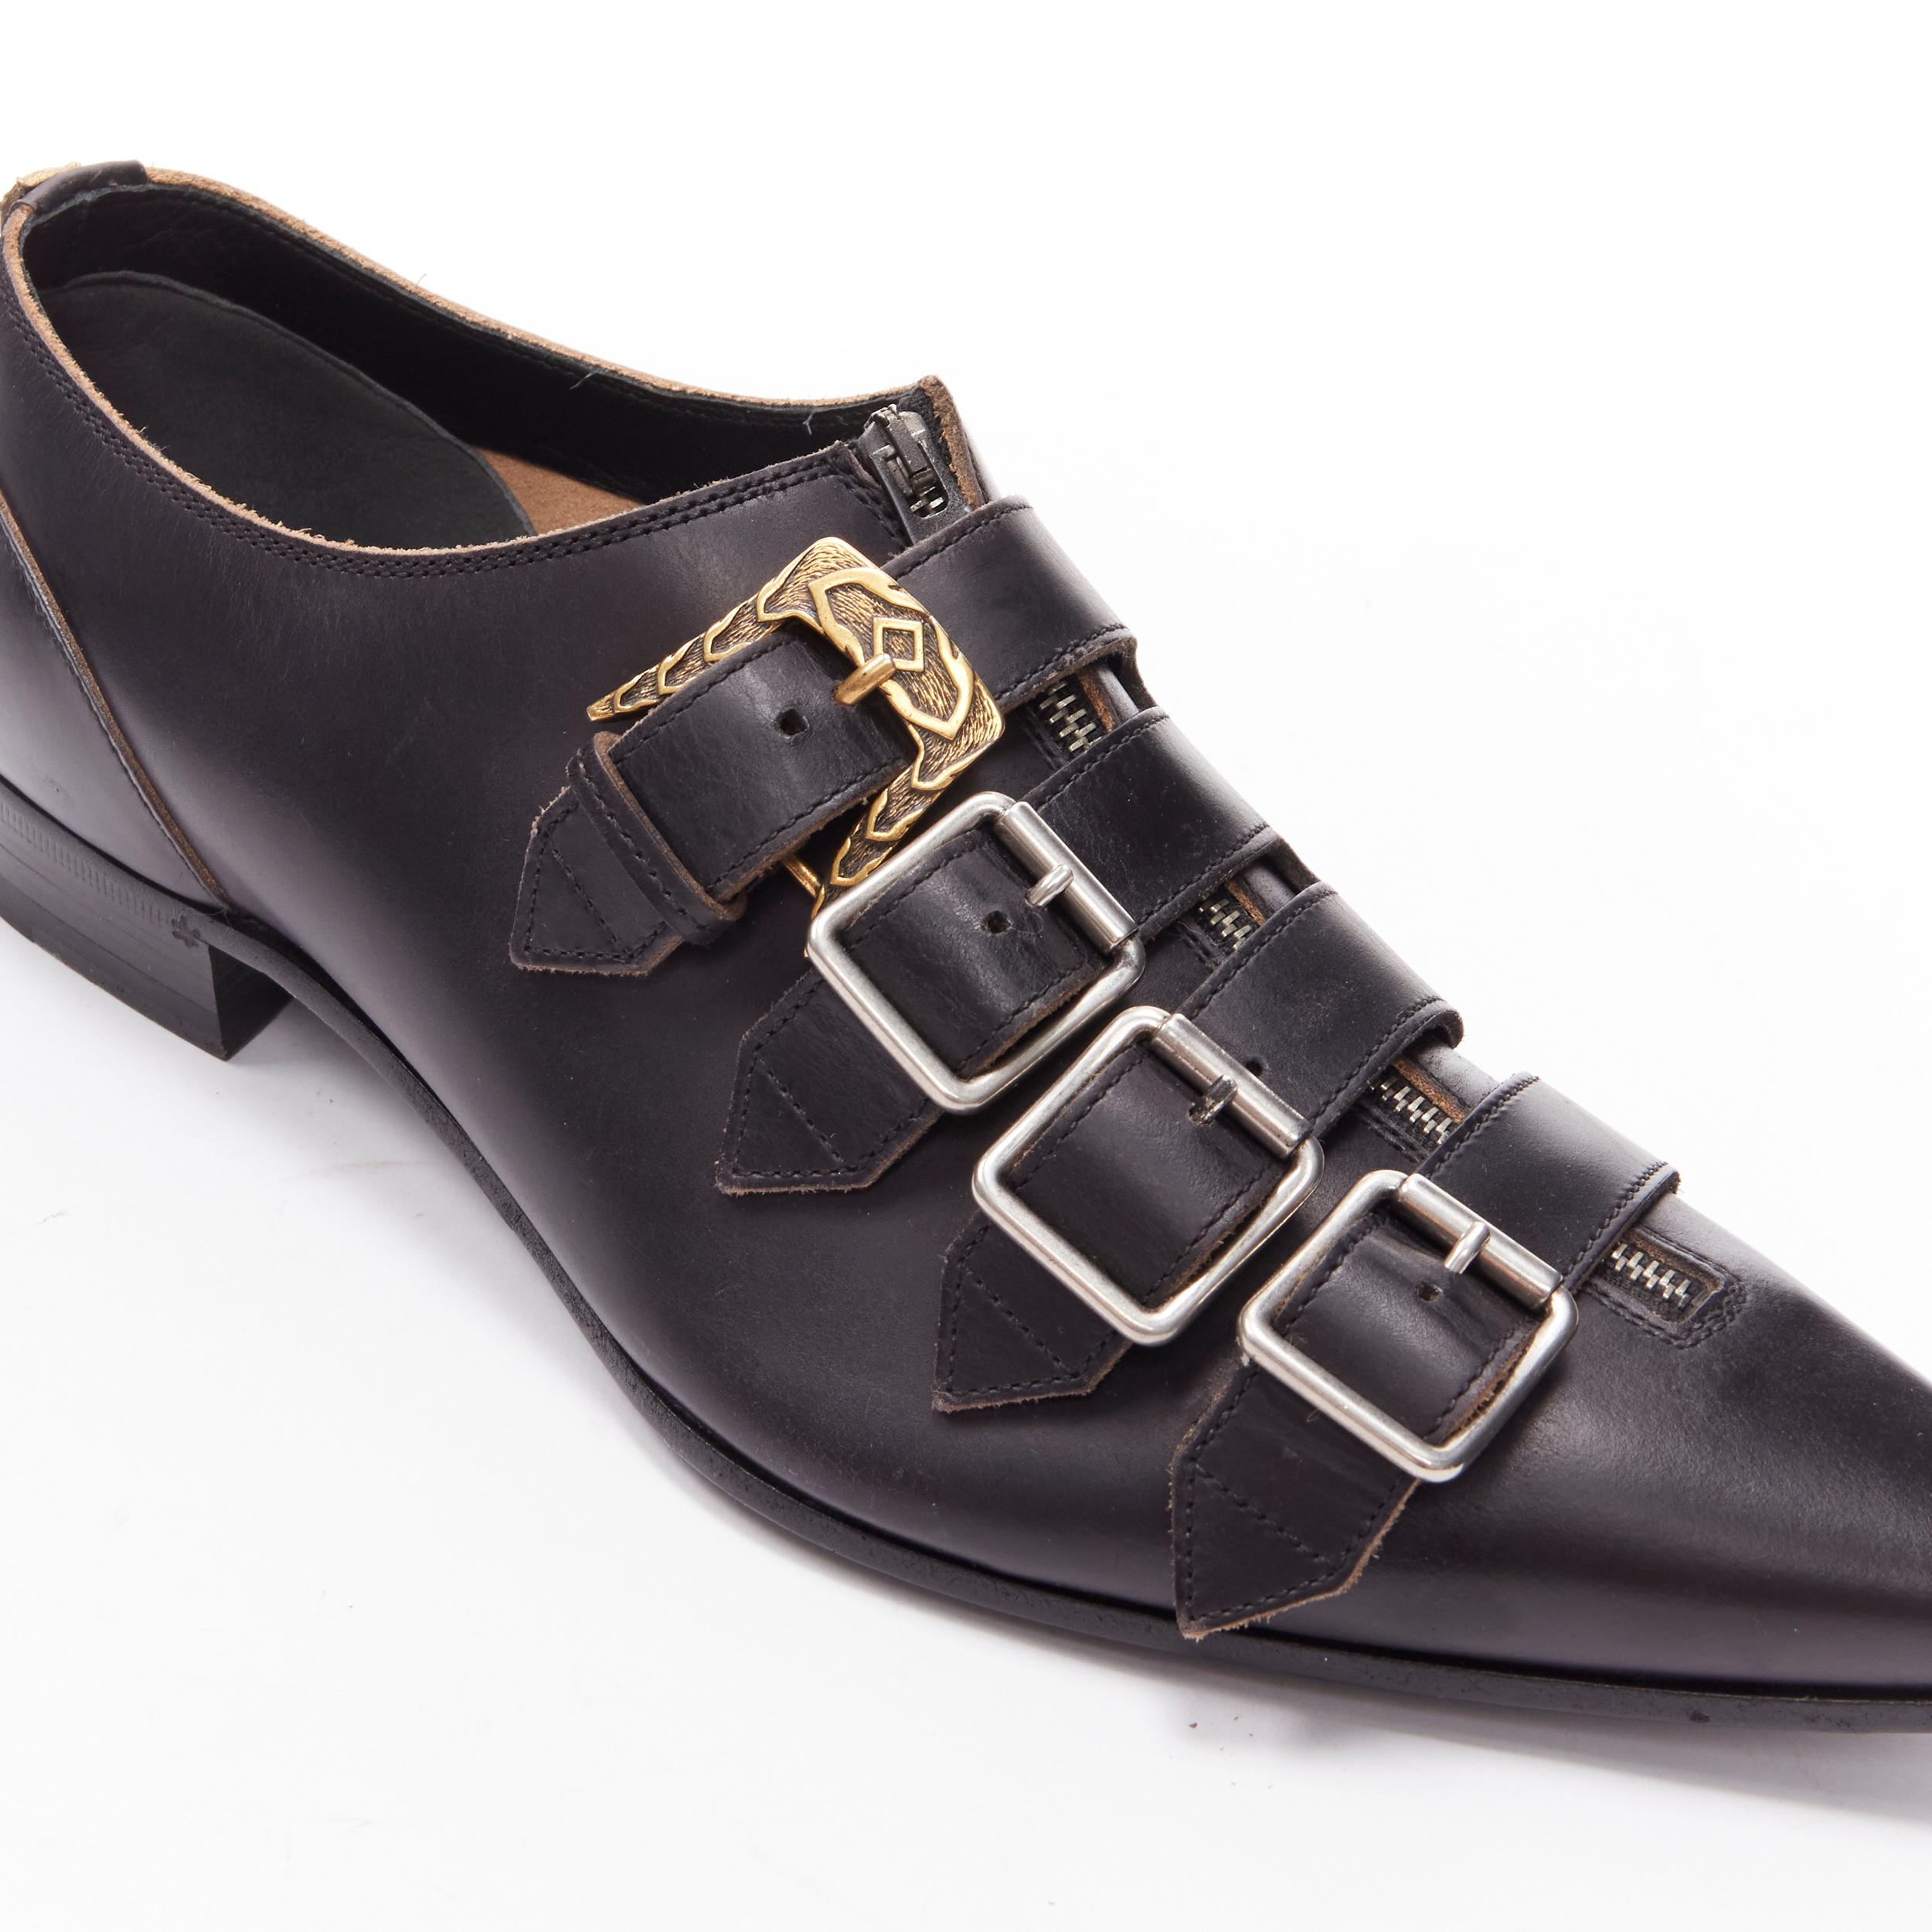 new GUCCI black leather 4 gold silver buckle Tiger stud pointy brogue UK8 EU42 
Reference: TGAS/B02017 
Brand: Gucci 
Designer: Alessandro Michele 
Material: Leather 
Color: Black 
Pattern: Solid 
Closure: Buckle 
Extra Detail: Mixed metal buckle.